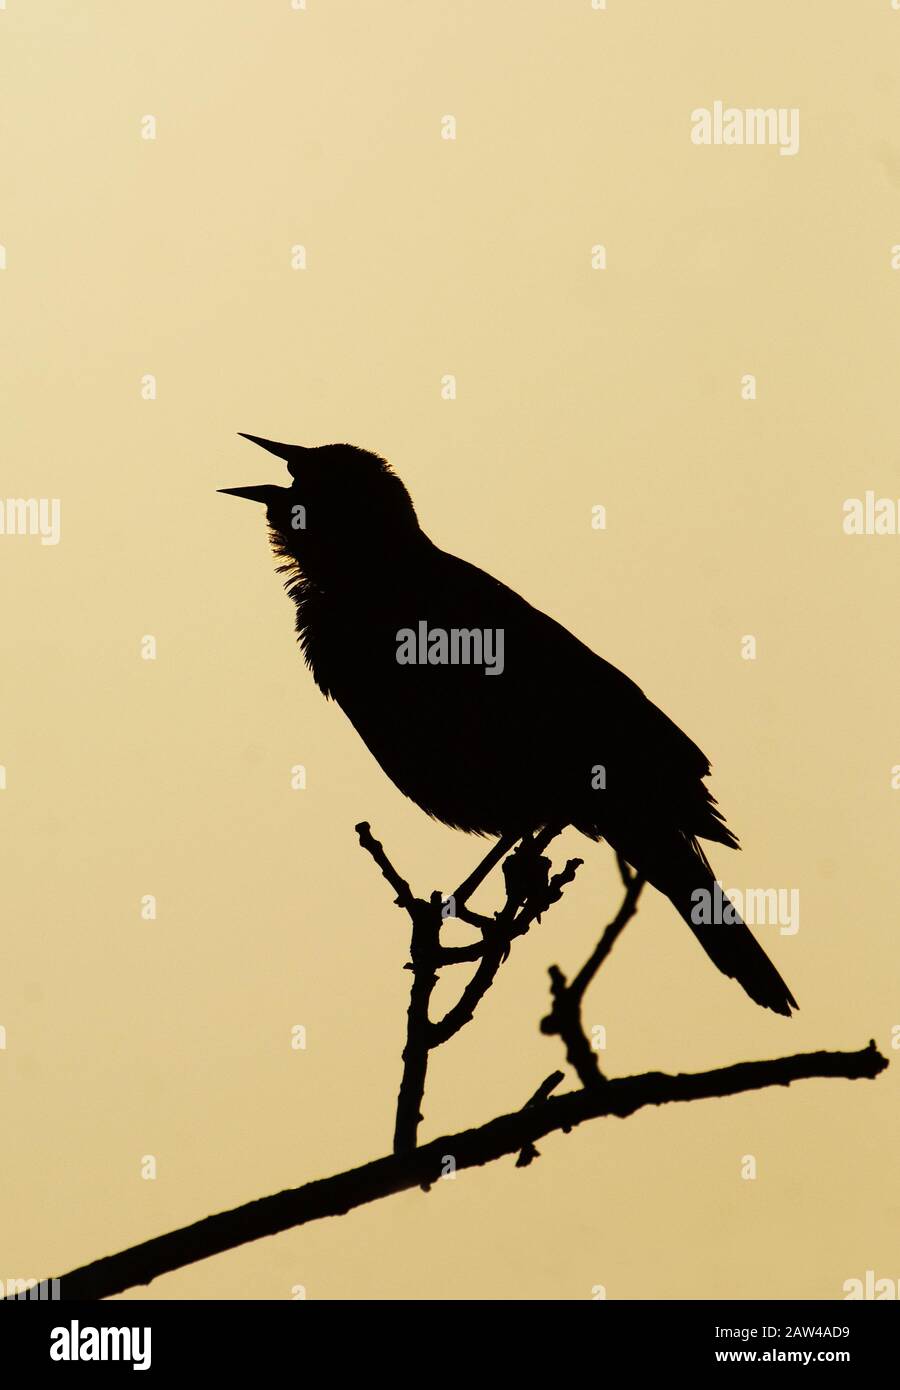 Blackbird vector Cut Out Stock Images & Pictures - Alamy